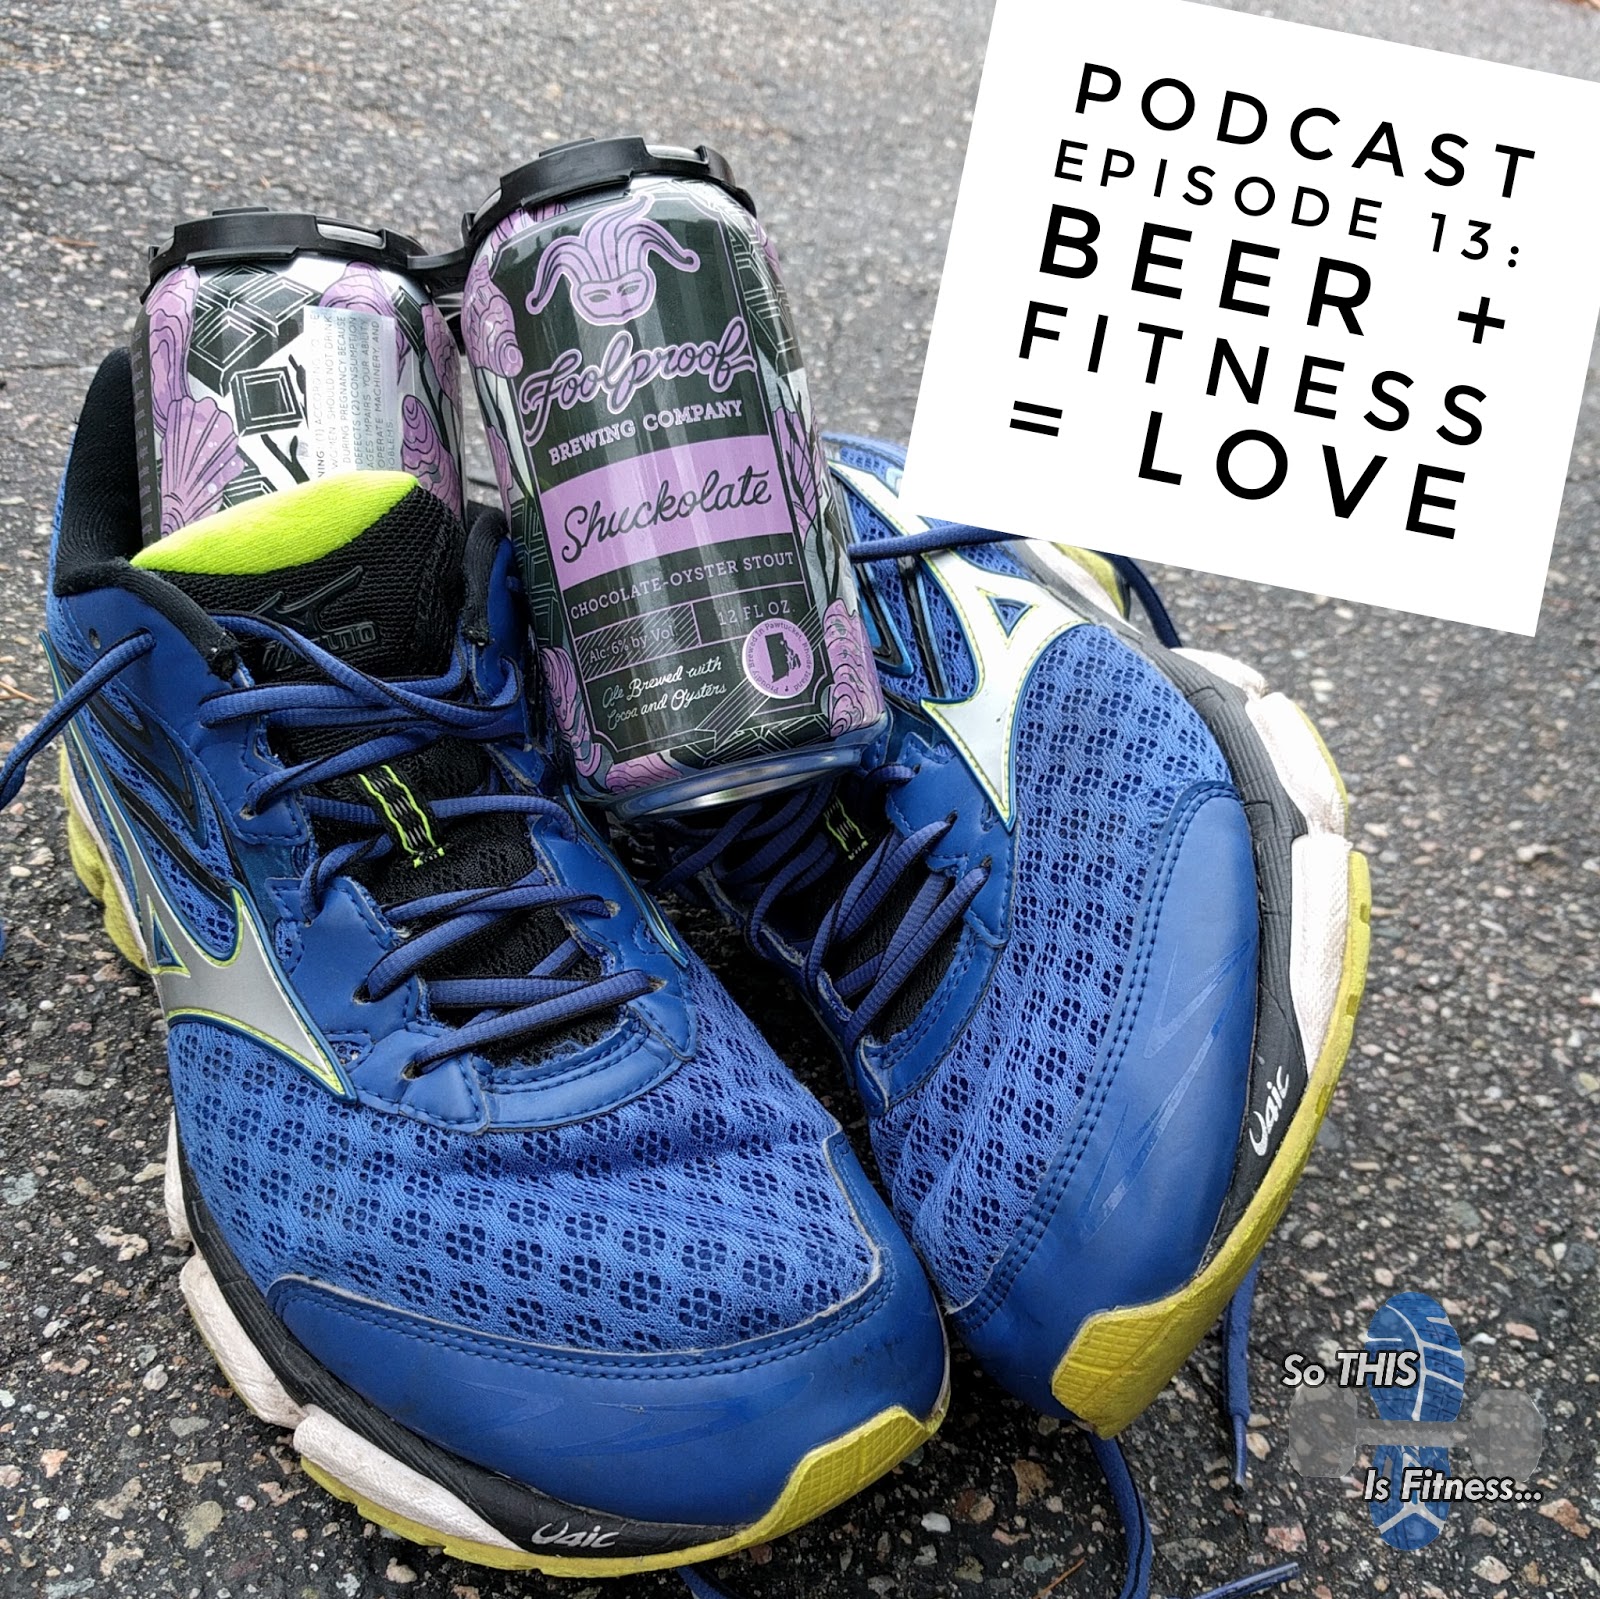 Podcast Ep. 13 | Beer + Fitness = Love